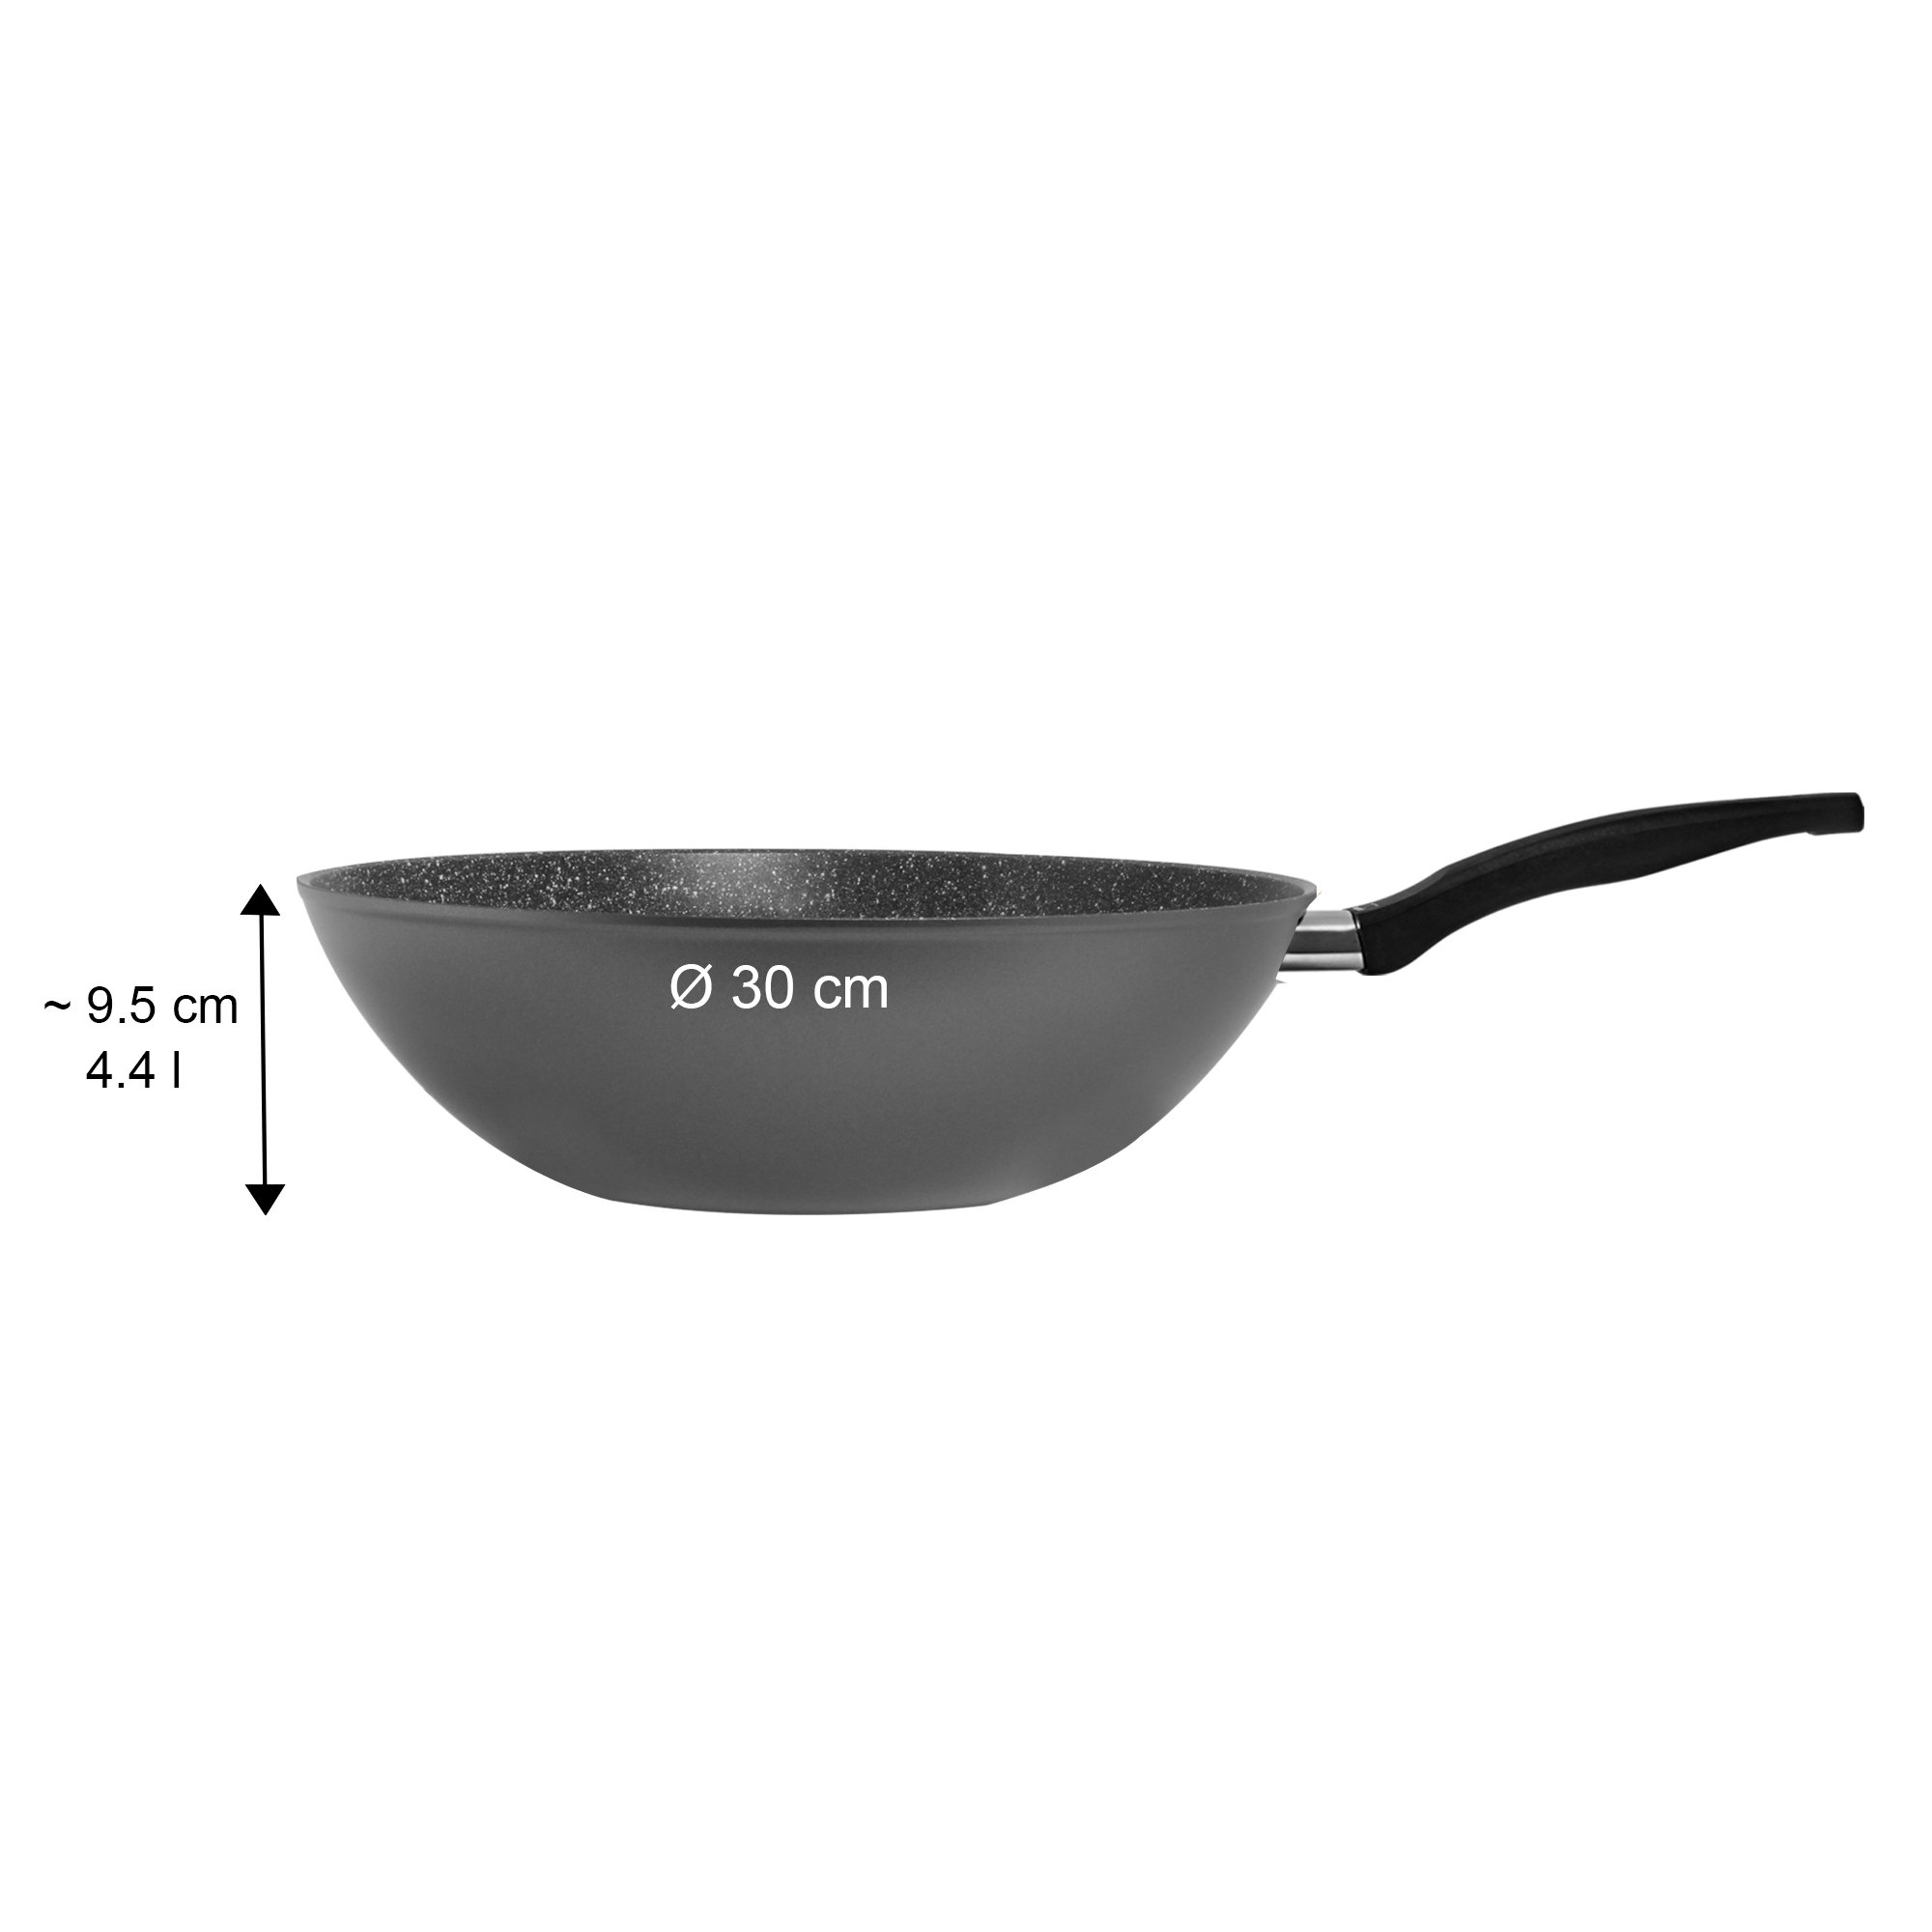 STONELINE® Wok Pan 30 cm, Non-Stick Pan | Made in Germany | CLASSIC